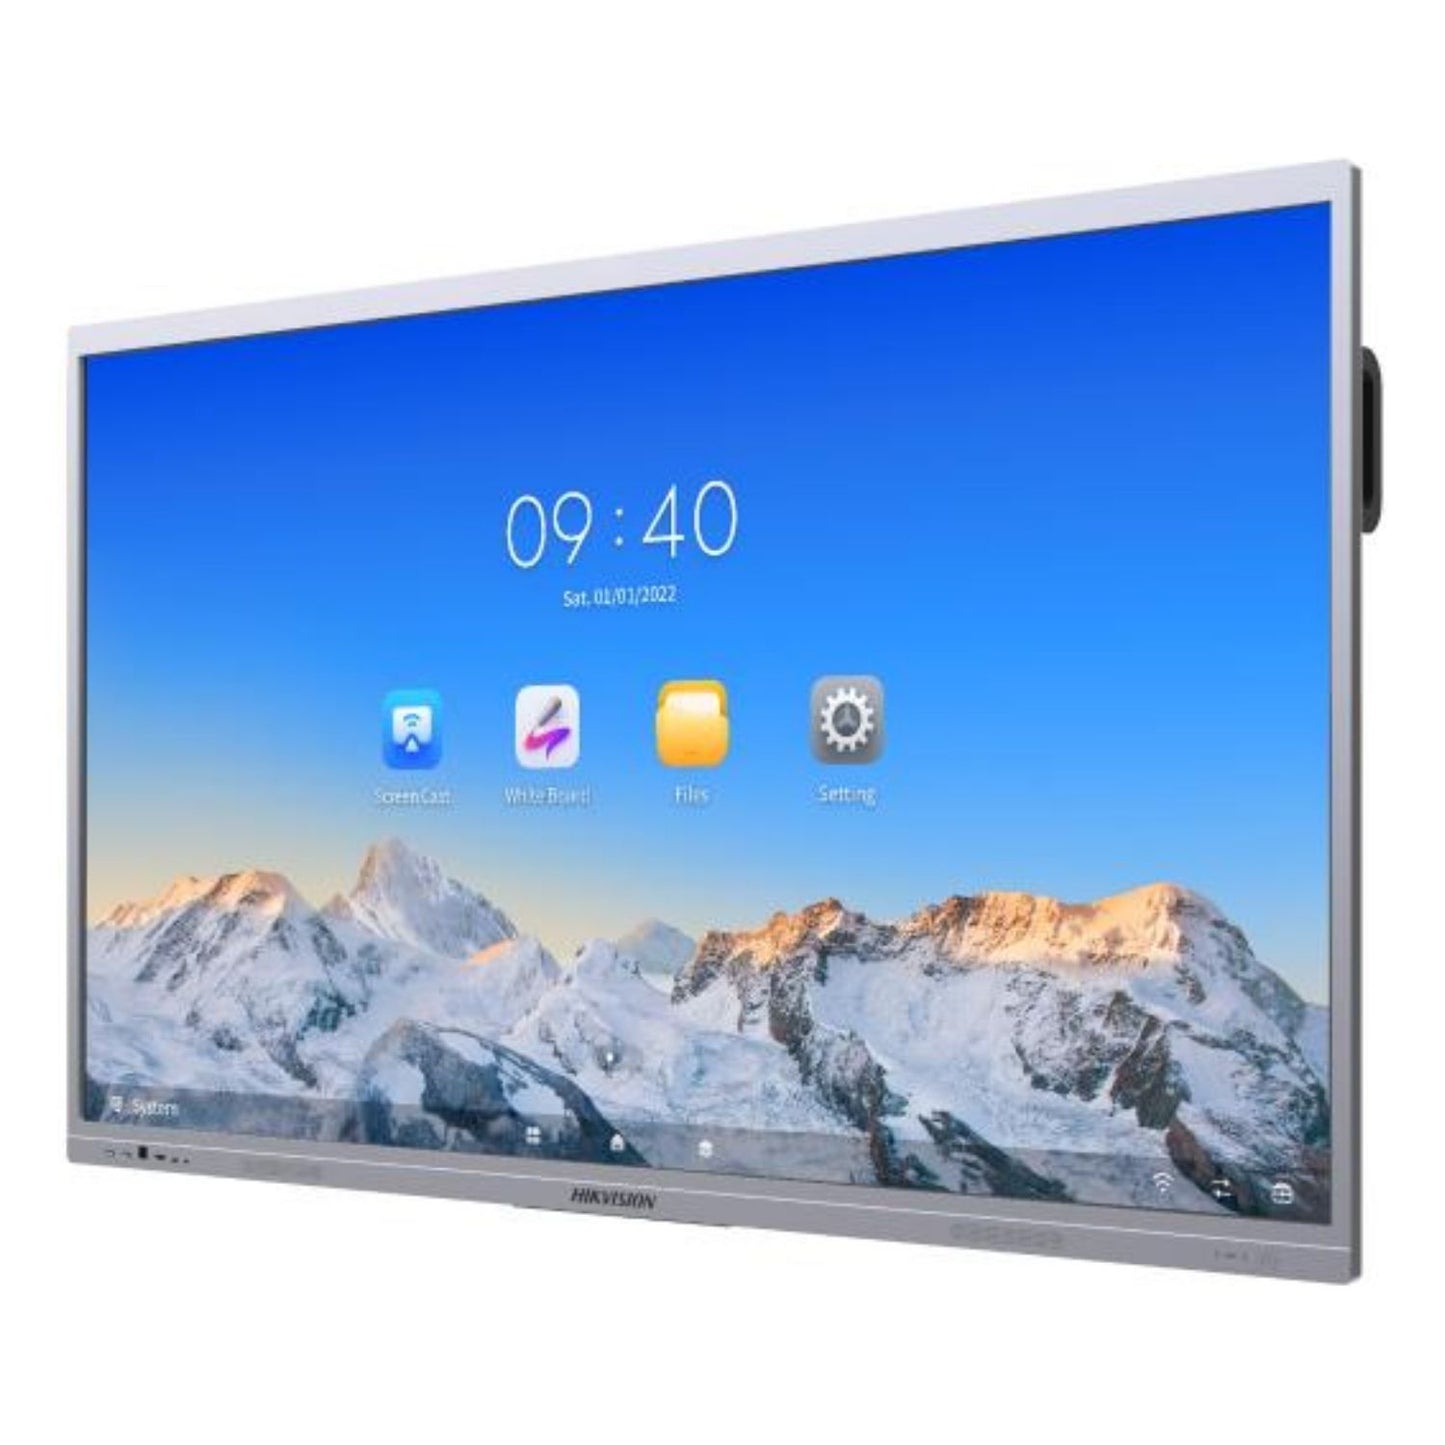 DS-D5C75RB/B - 75-inch 4K Interactive Display